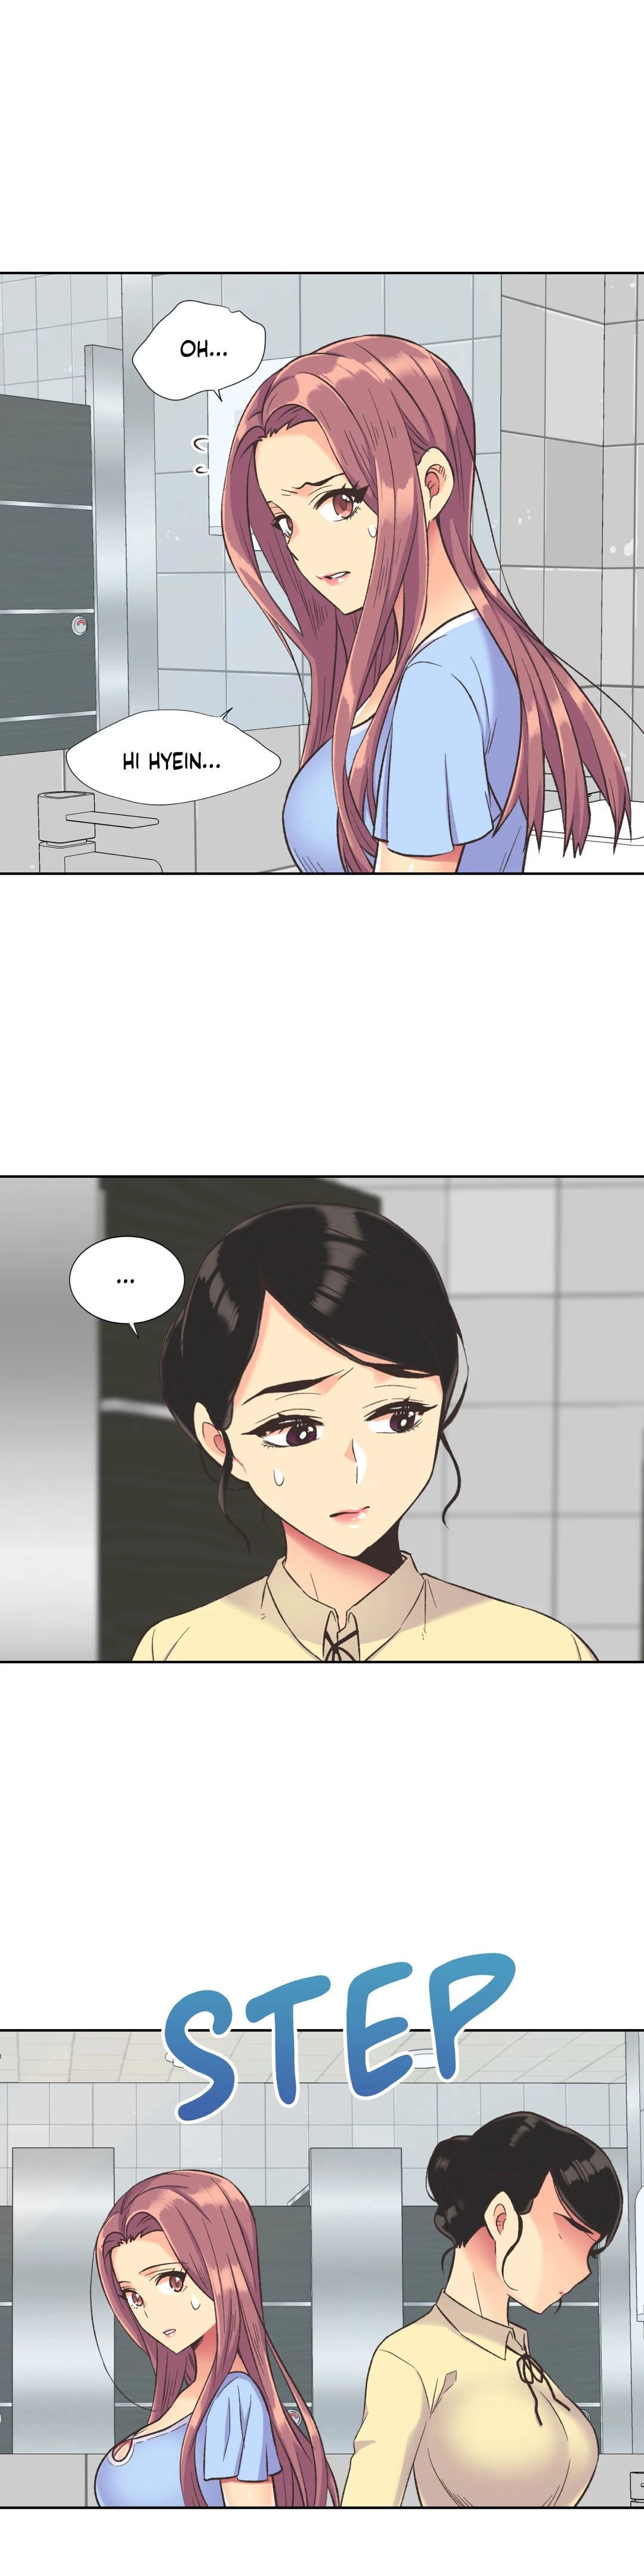 the-yes-girl-chap-36-19